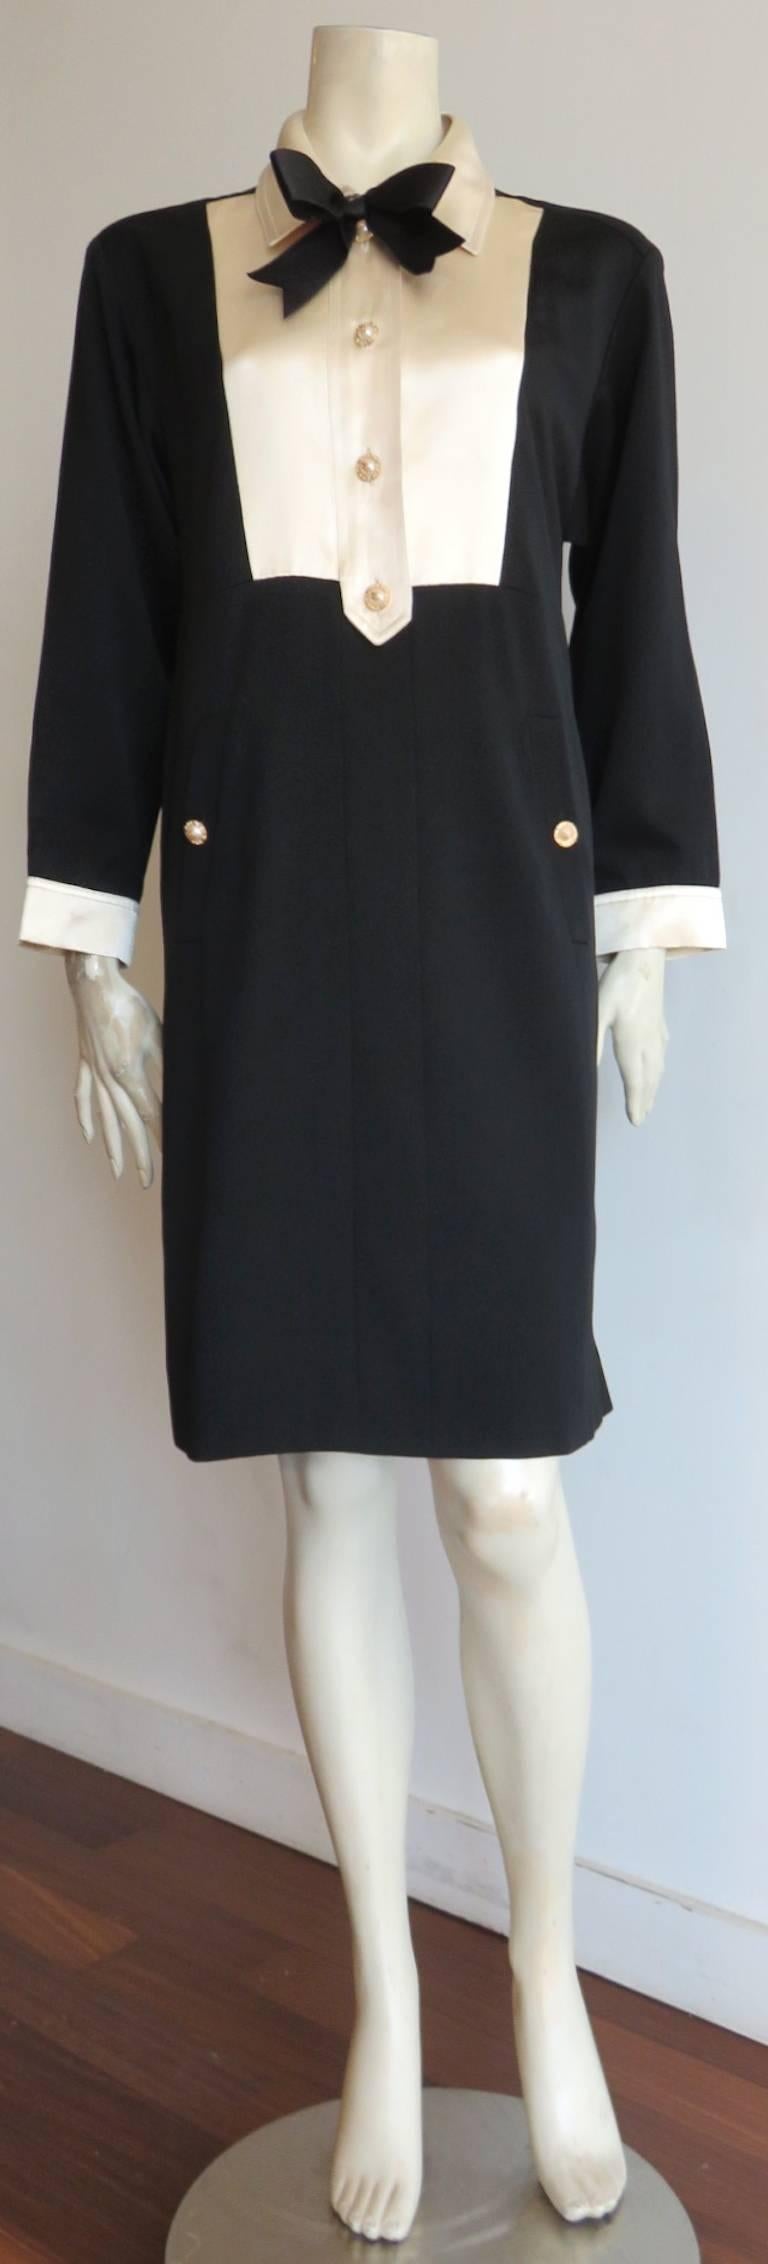 1980's, CHANEL BOUTIQUE, silk, bib-front, 'tuxedo' dress.

Black wool shell with ivory silk bib front, collar, and cuffs. 

Silk, black ribbon bow detail at front neck. 

Faux-pearl, gold rimmed buttons with metal, 'CC' logo center.

Twin